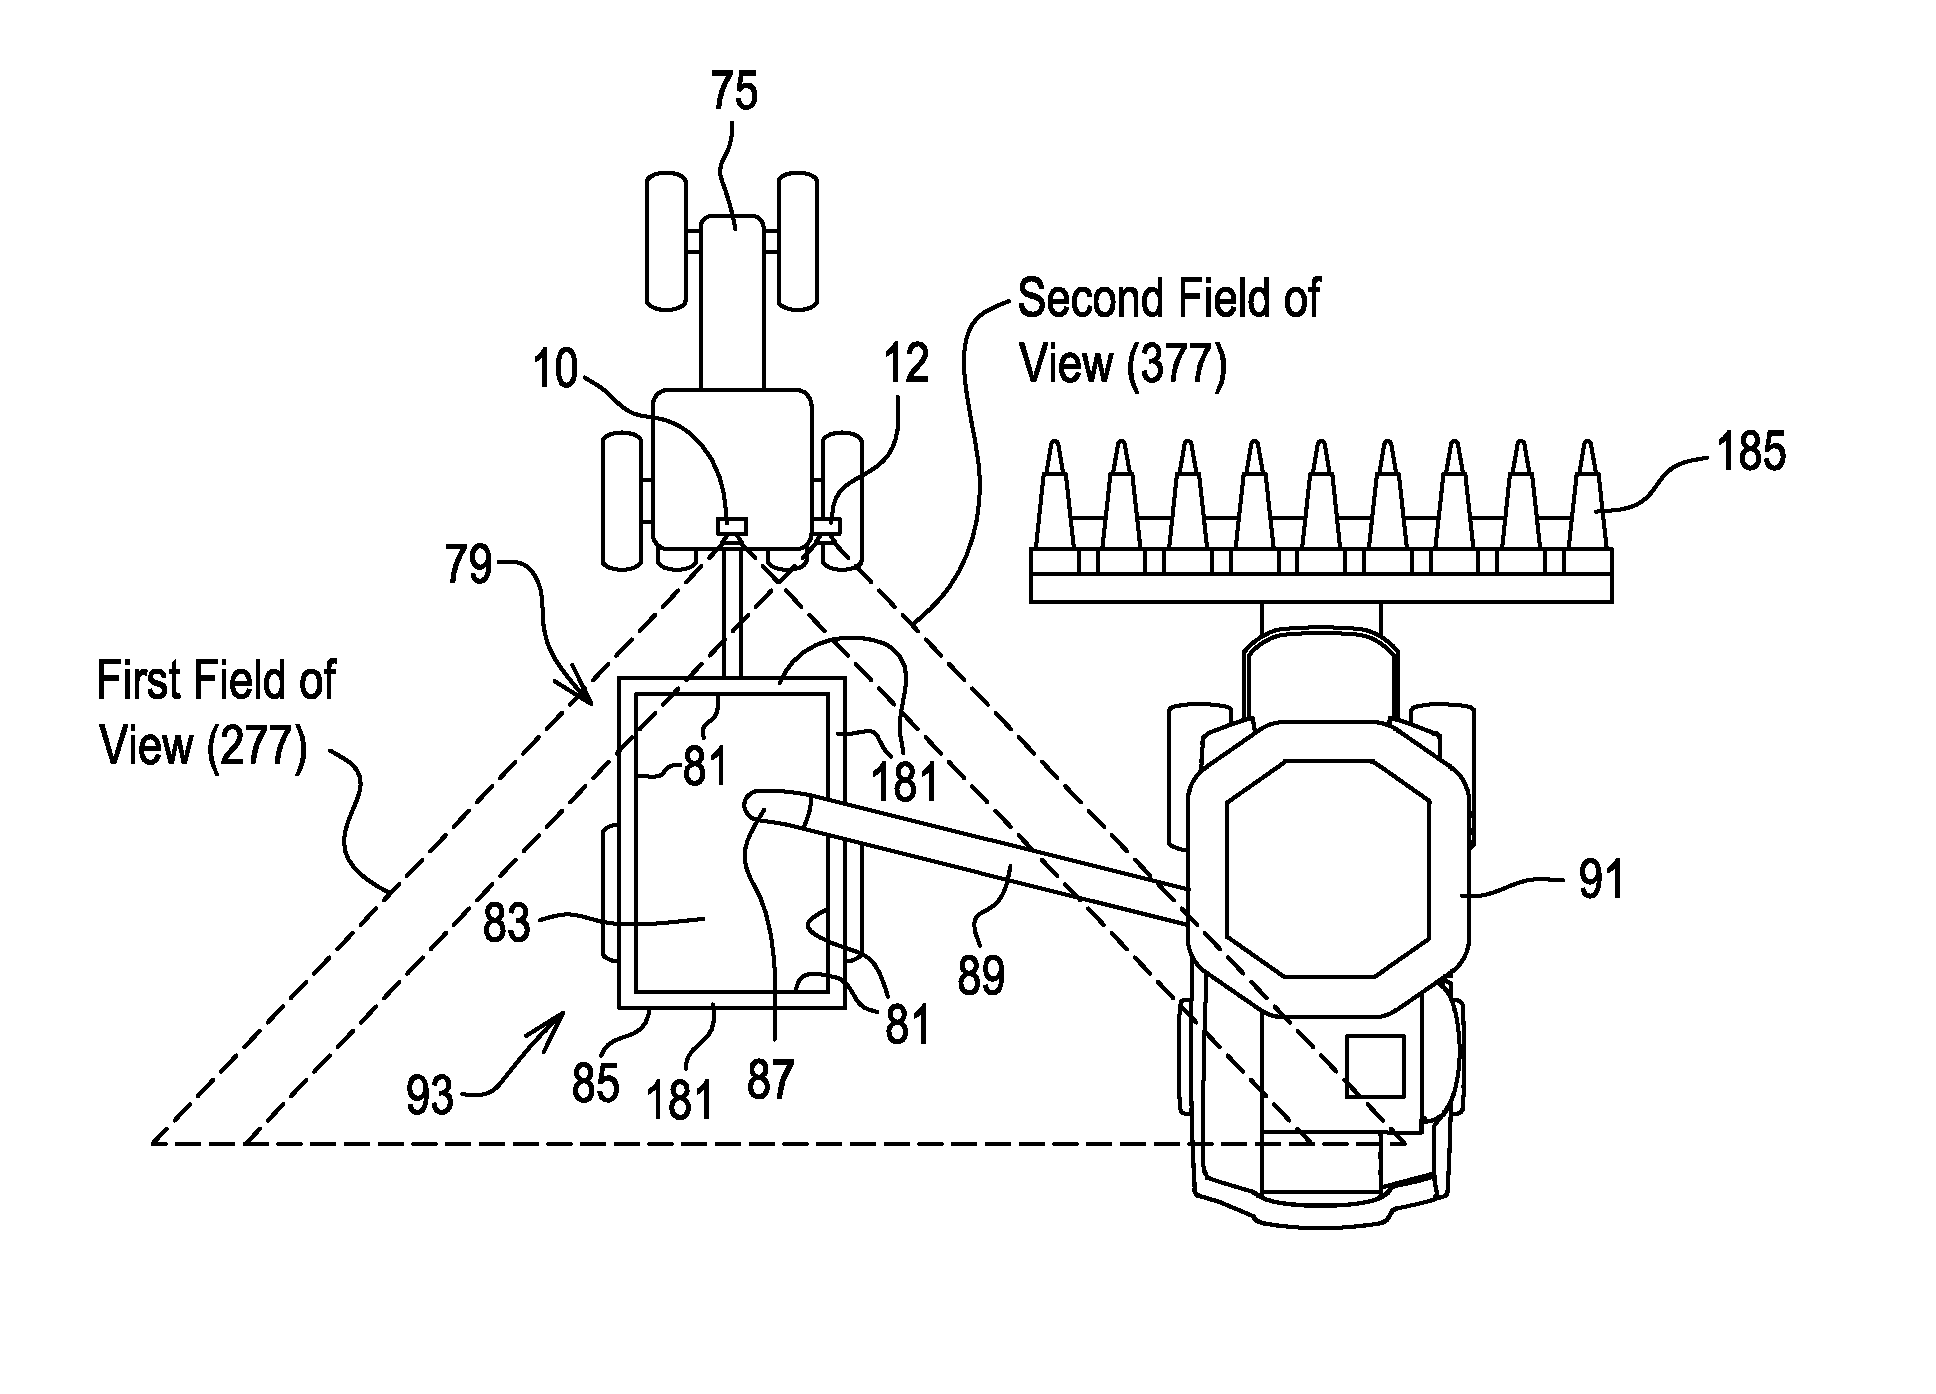 Method and stereo vision system for managing the unloading of an agricultural material from a vehicle